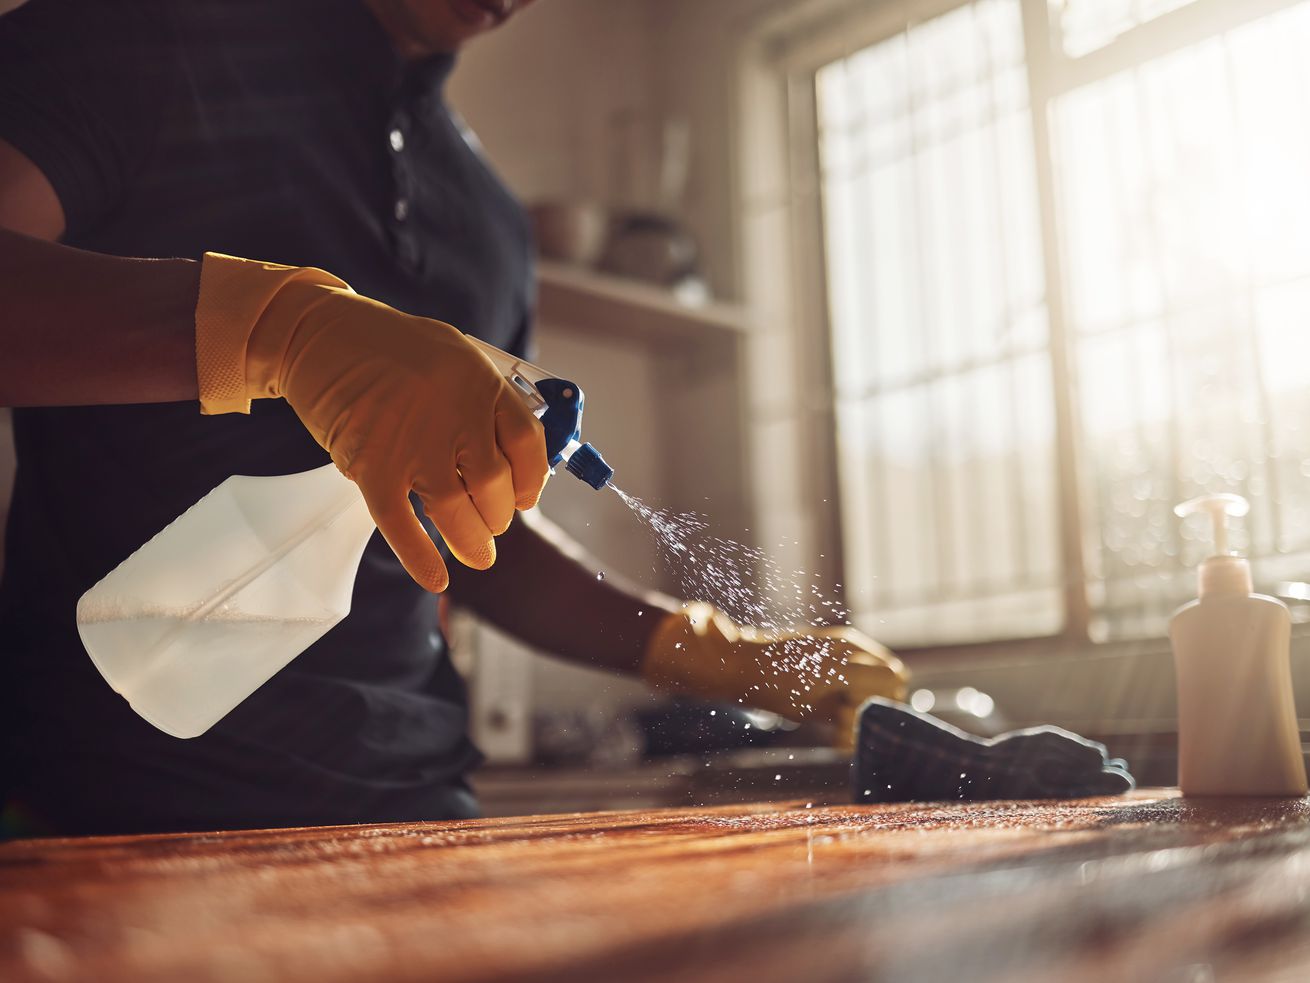 How to Clean Butcher Block Surfaces